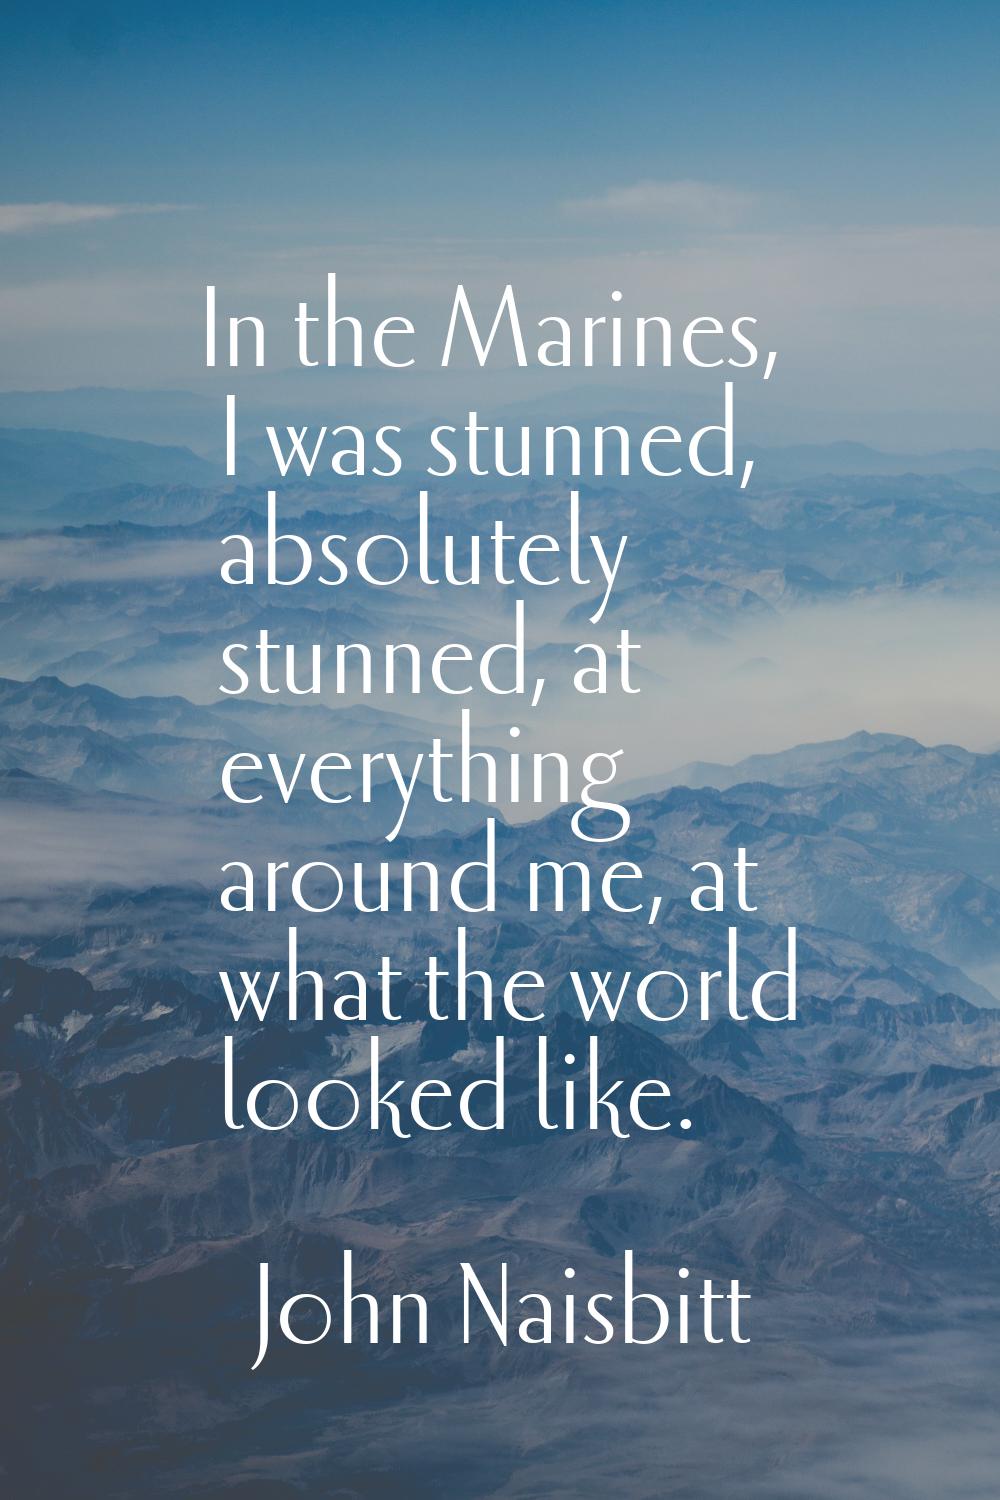 In the Marines, I was stunned, absolutely stunned, at everything around me, at what the world looke